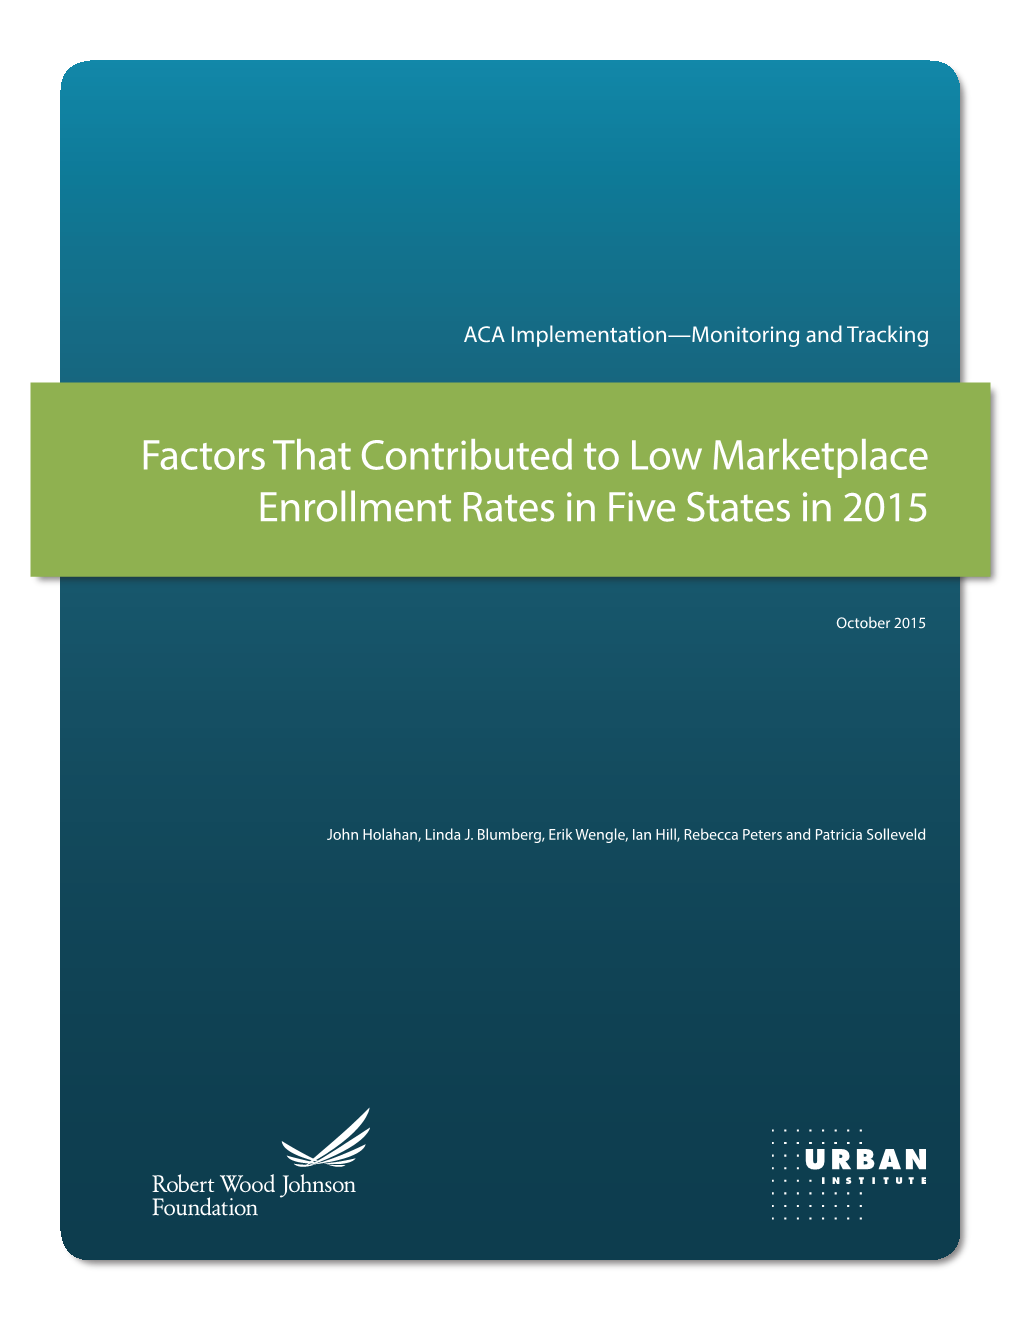 Factors That Contributed to Low Marketplace Enrollment Rates in Five States in 2015